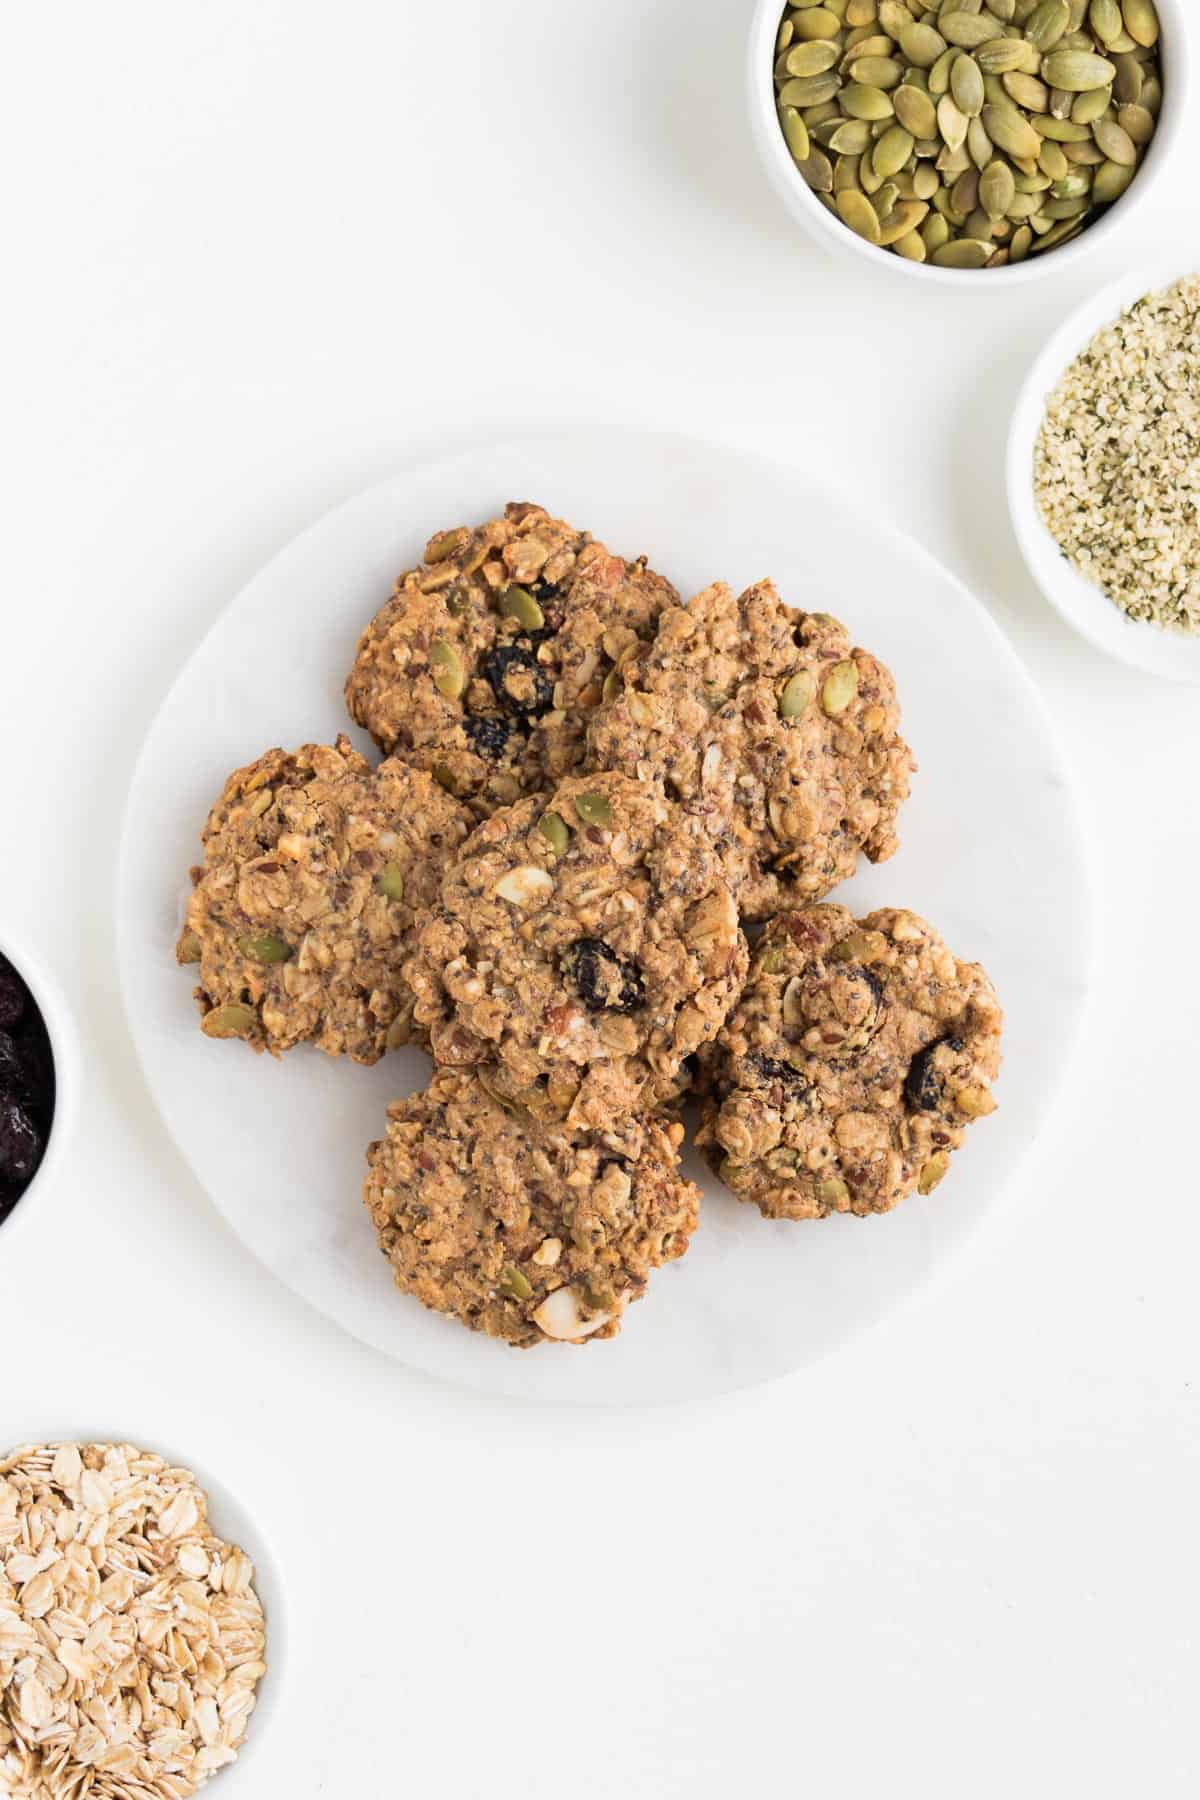 six superfood breakfast cookies surrounded by small white bowls filled with pumpkin seeds, cranberries, rolled oats, and hemp seeds